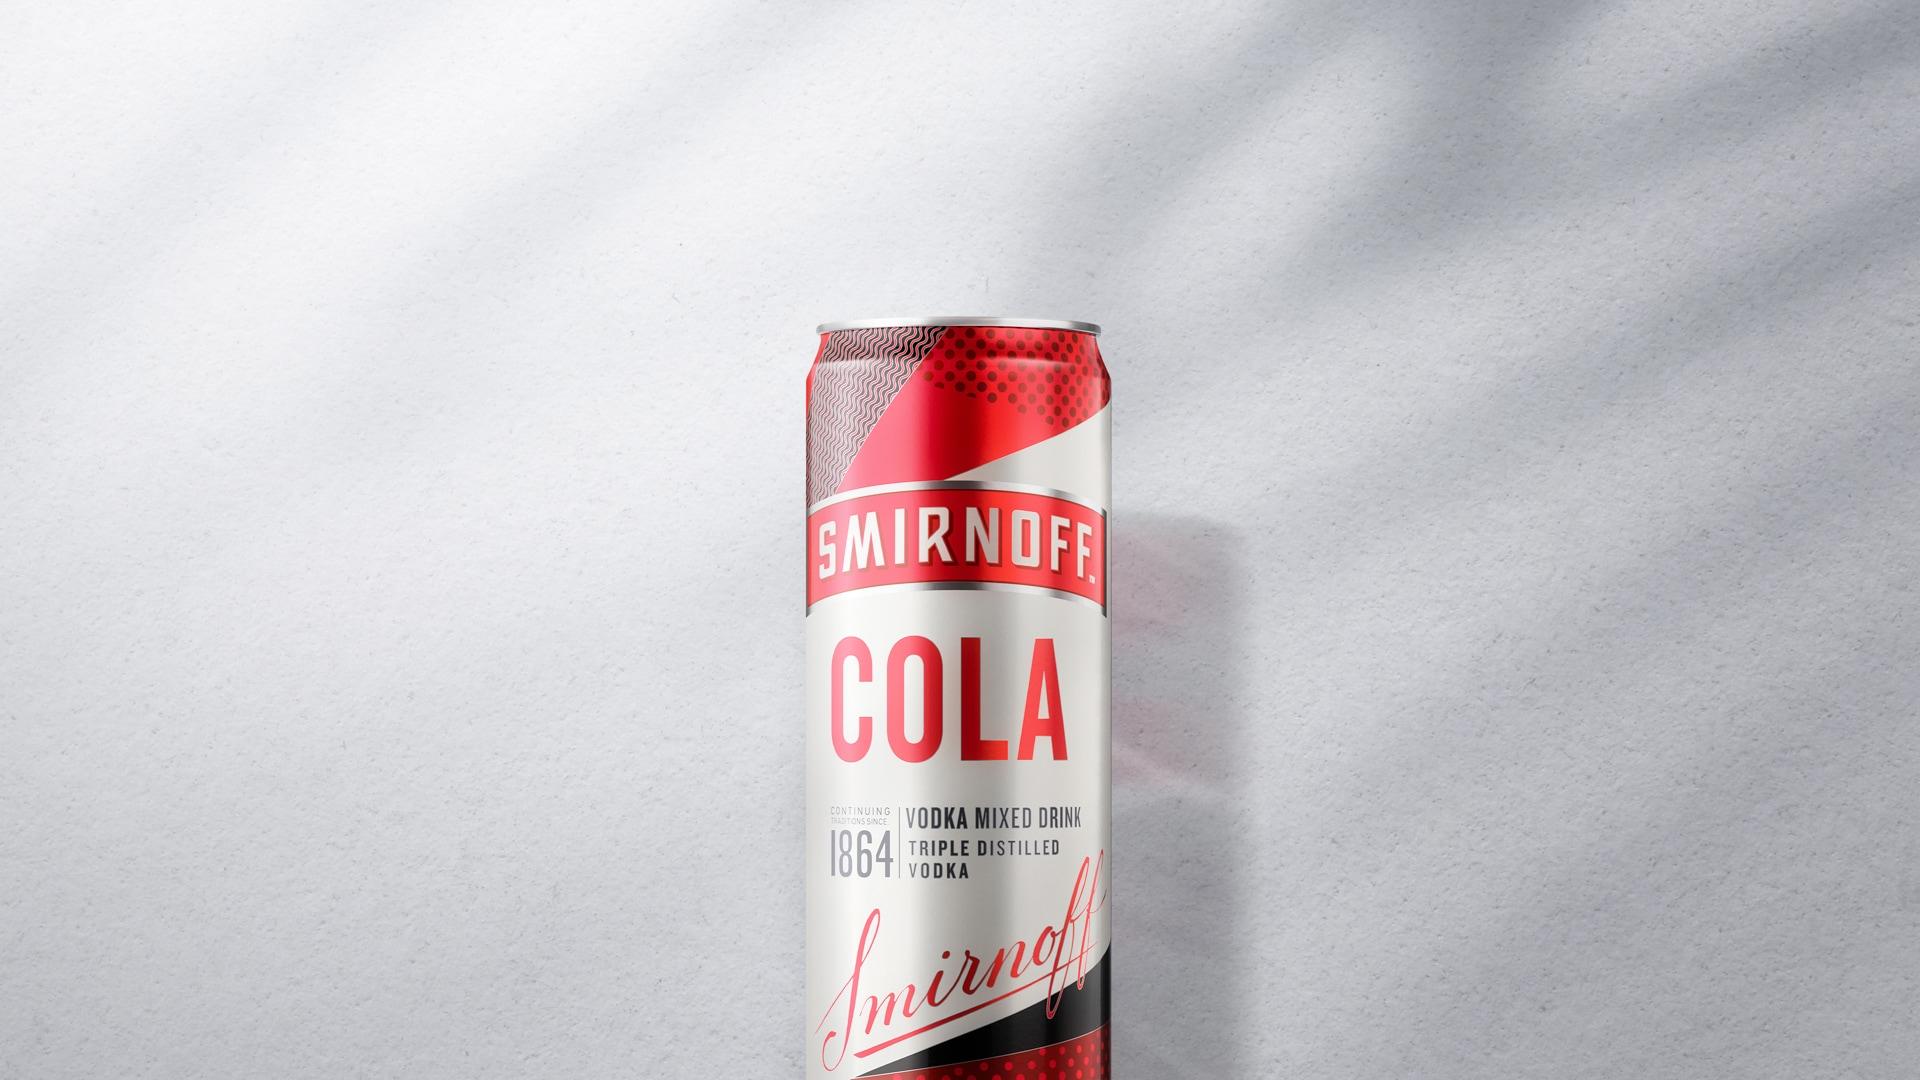 Vodka and Cola on a gray background